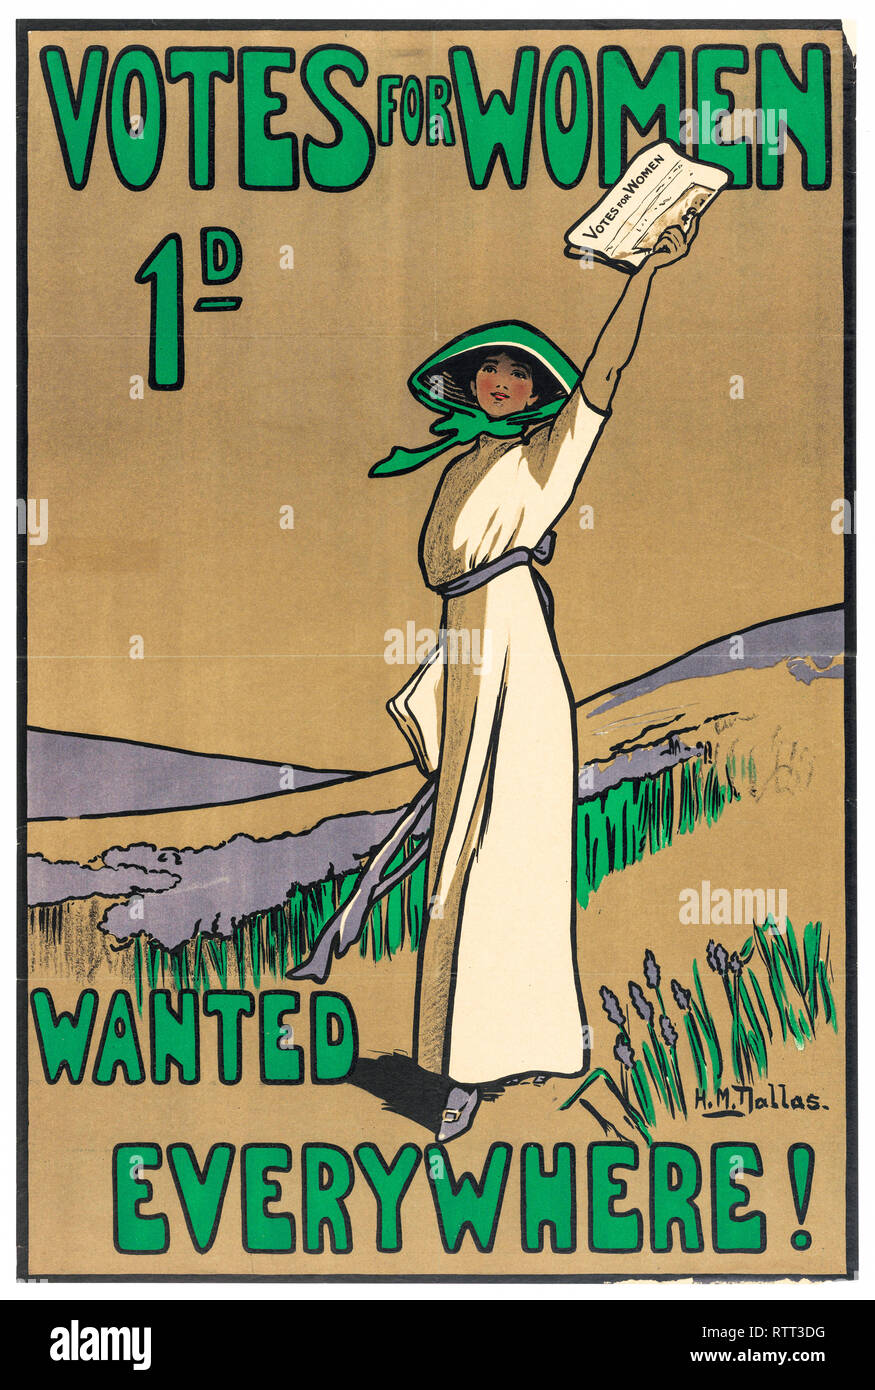 British Votes for Women poster, 1d, Wanted Everywhere!, women's suffrage, circa 1903-1926, UK Stock Photo